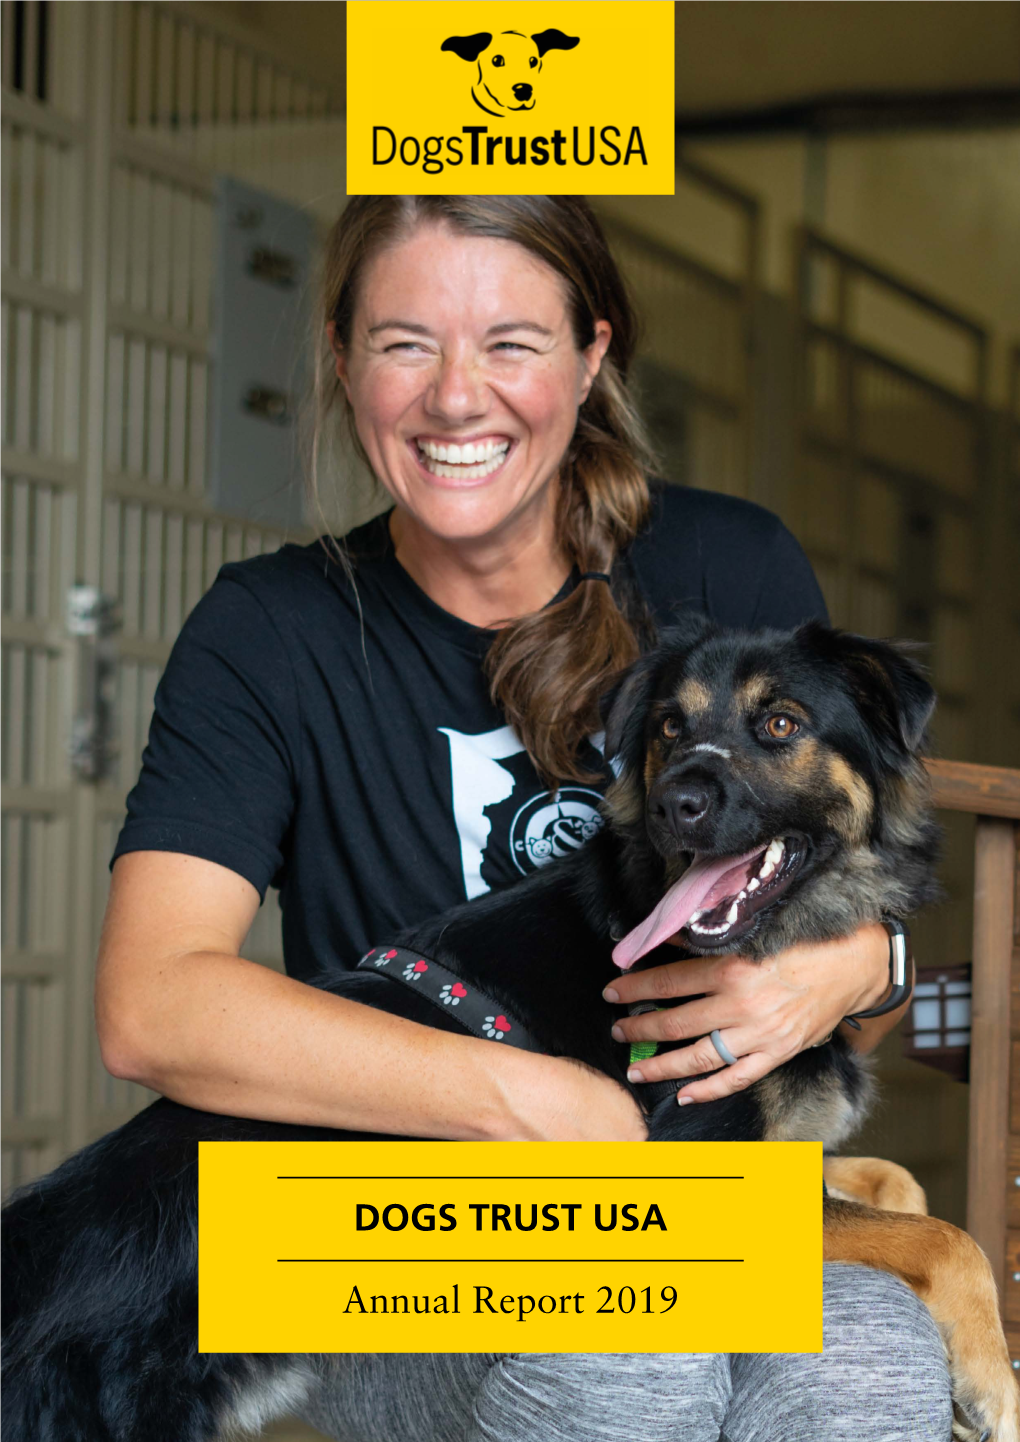 DOGS TRUST USA Annual Report 2019